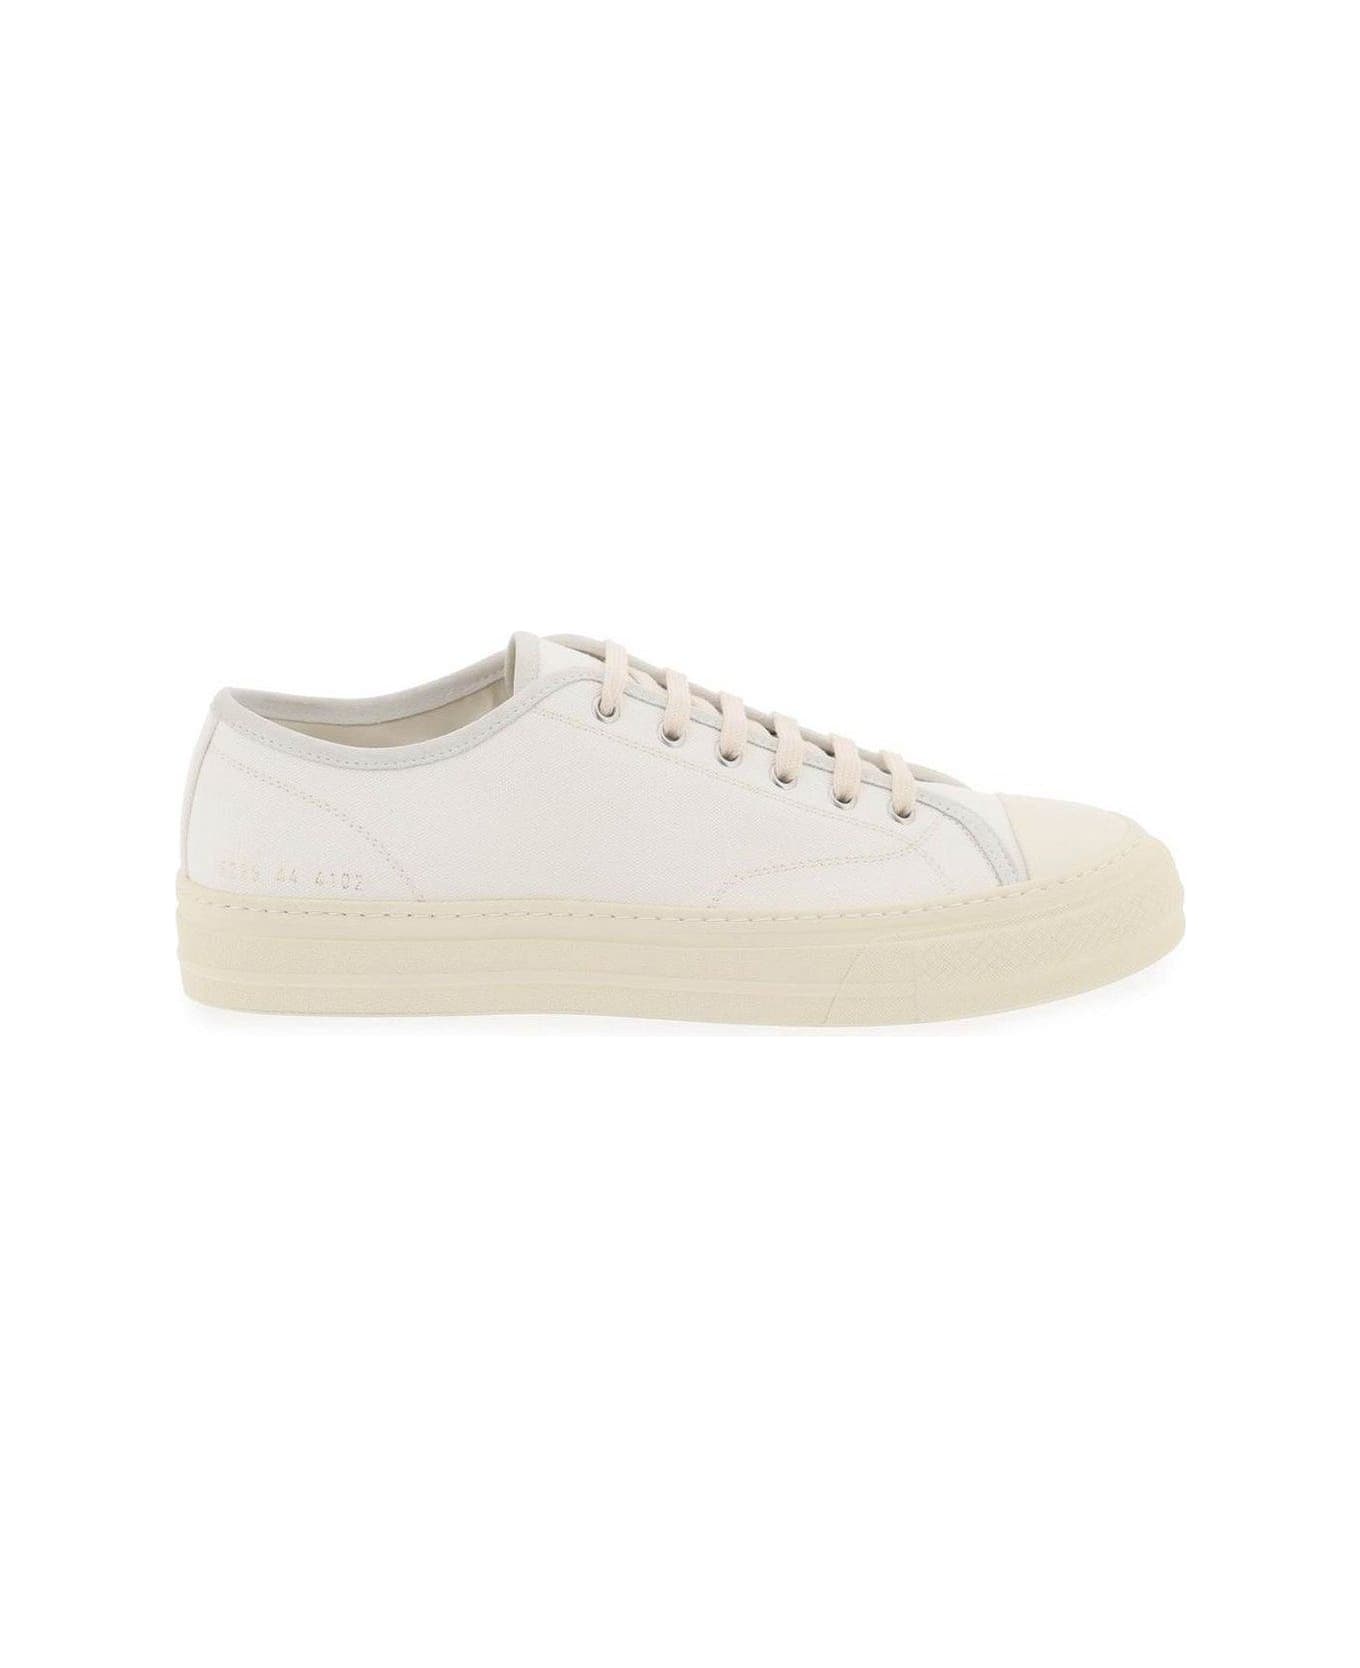 Common Projects Tournament Round Toe Sneakers - White